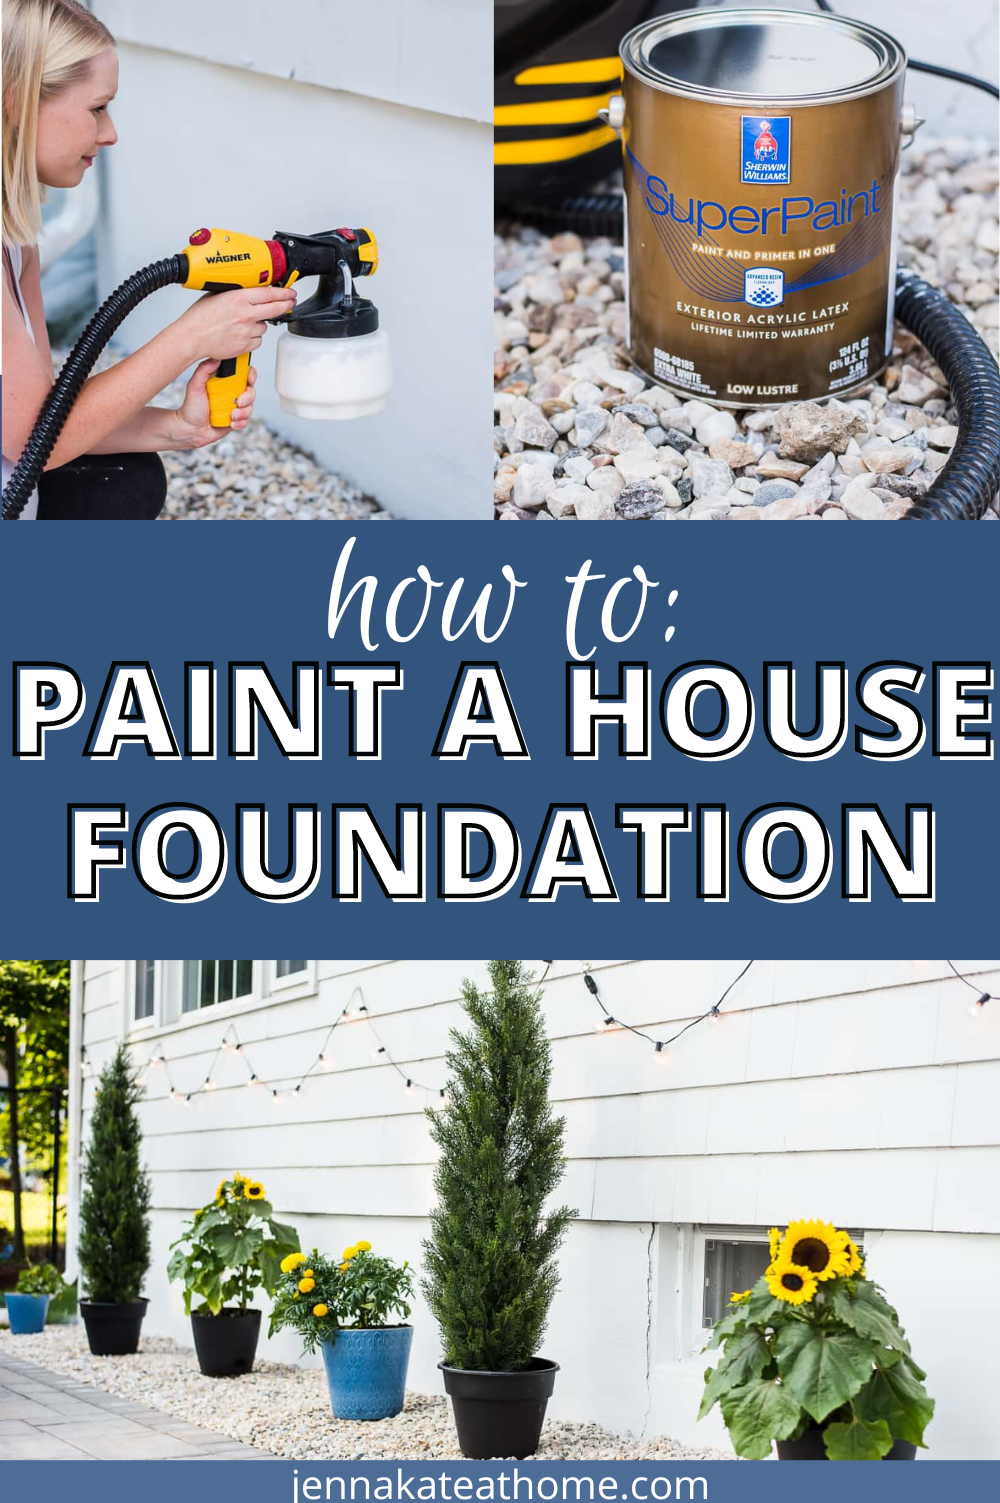 How to paint a house foundation